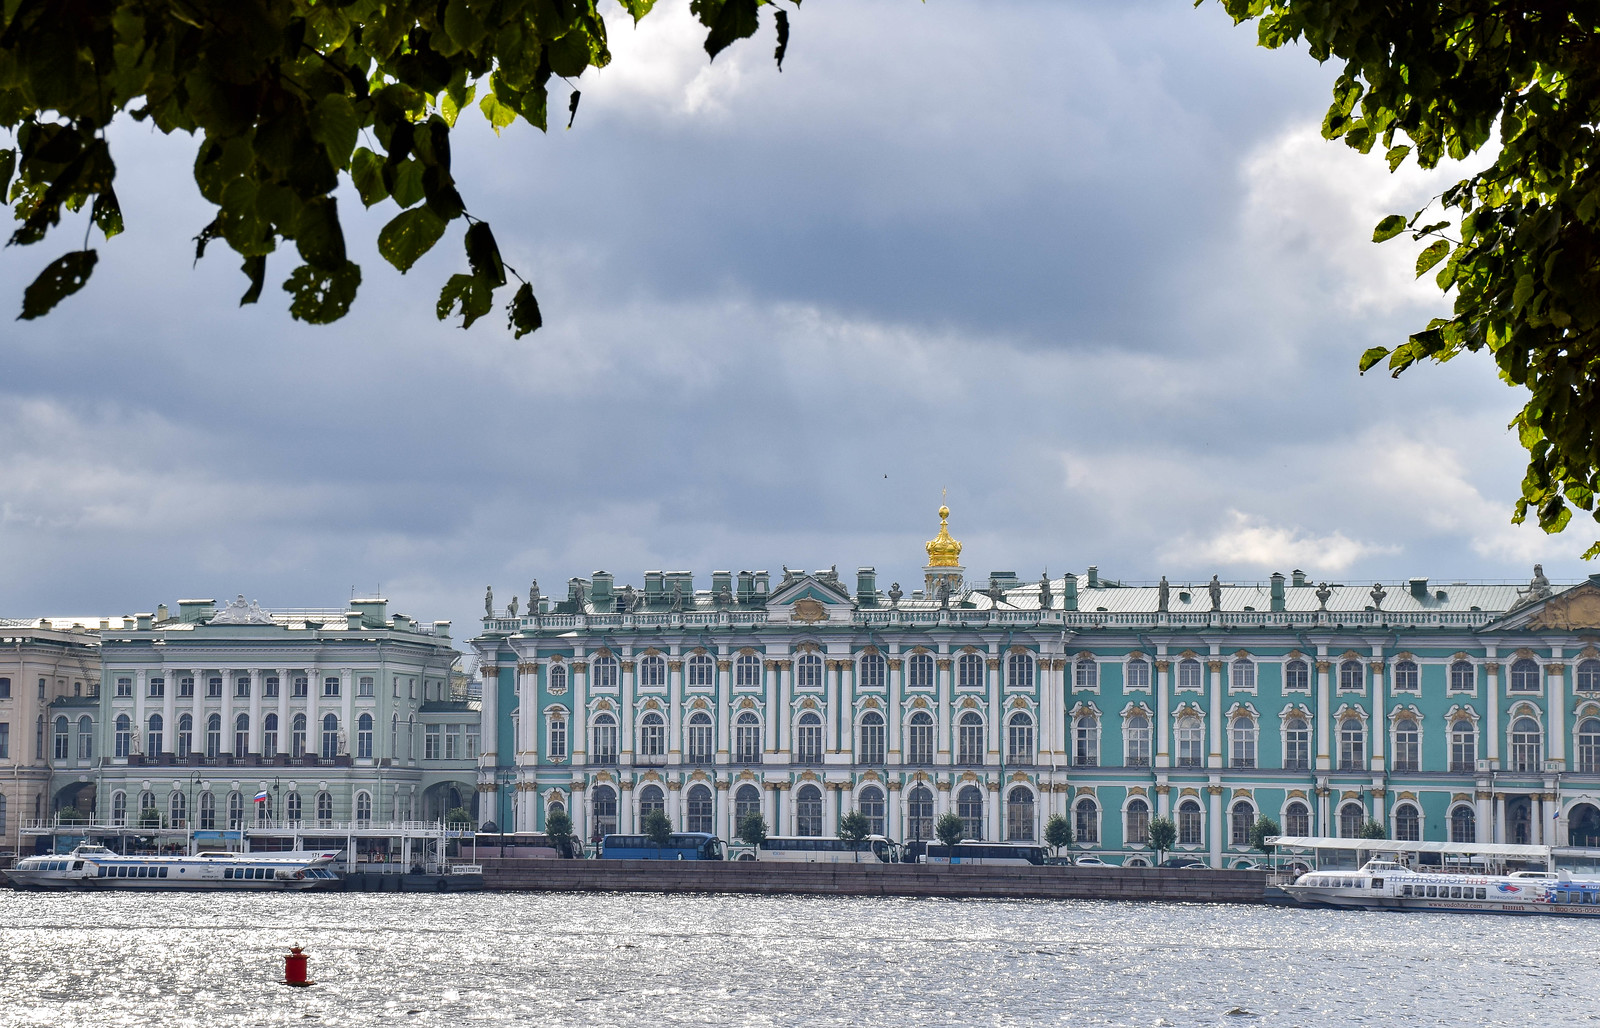 The Winter Palace, looking across the Neva River while sightseeing in St. Petersburg